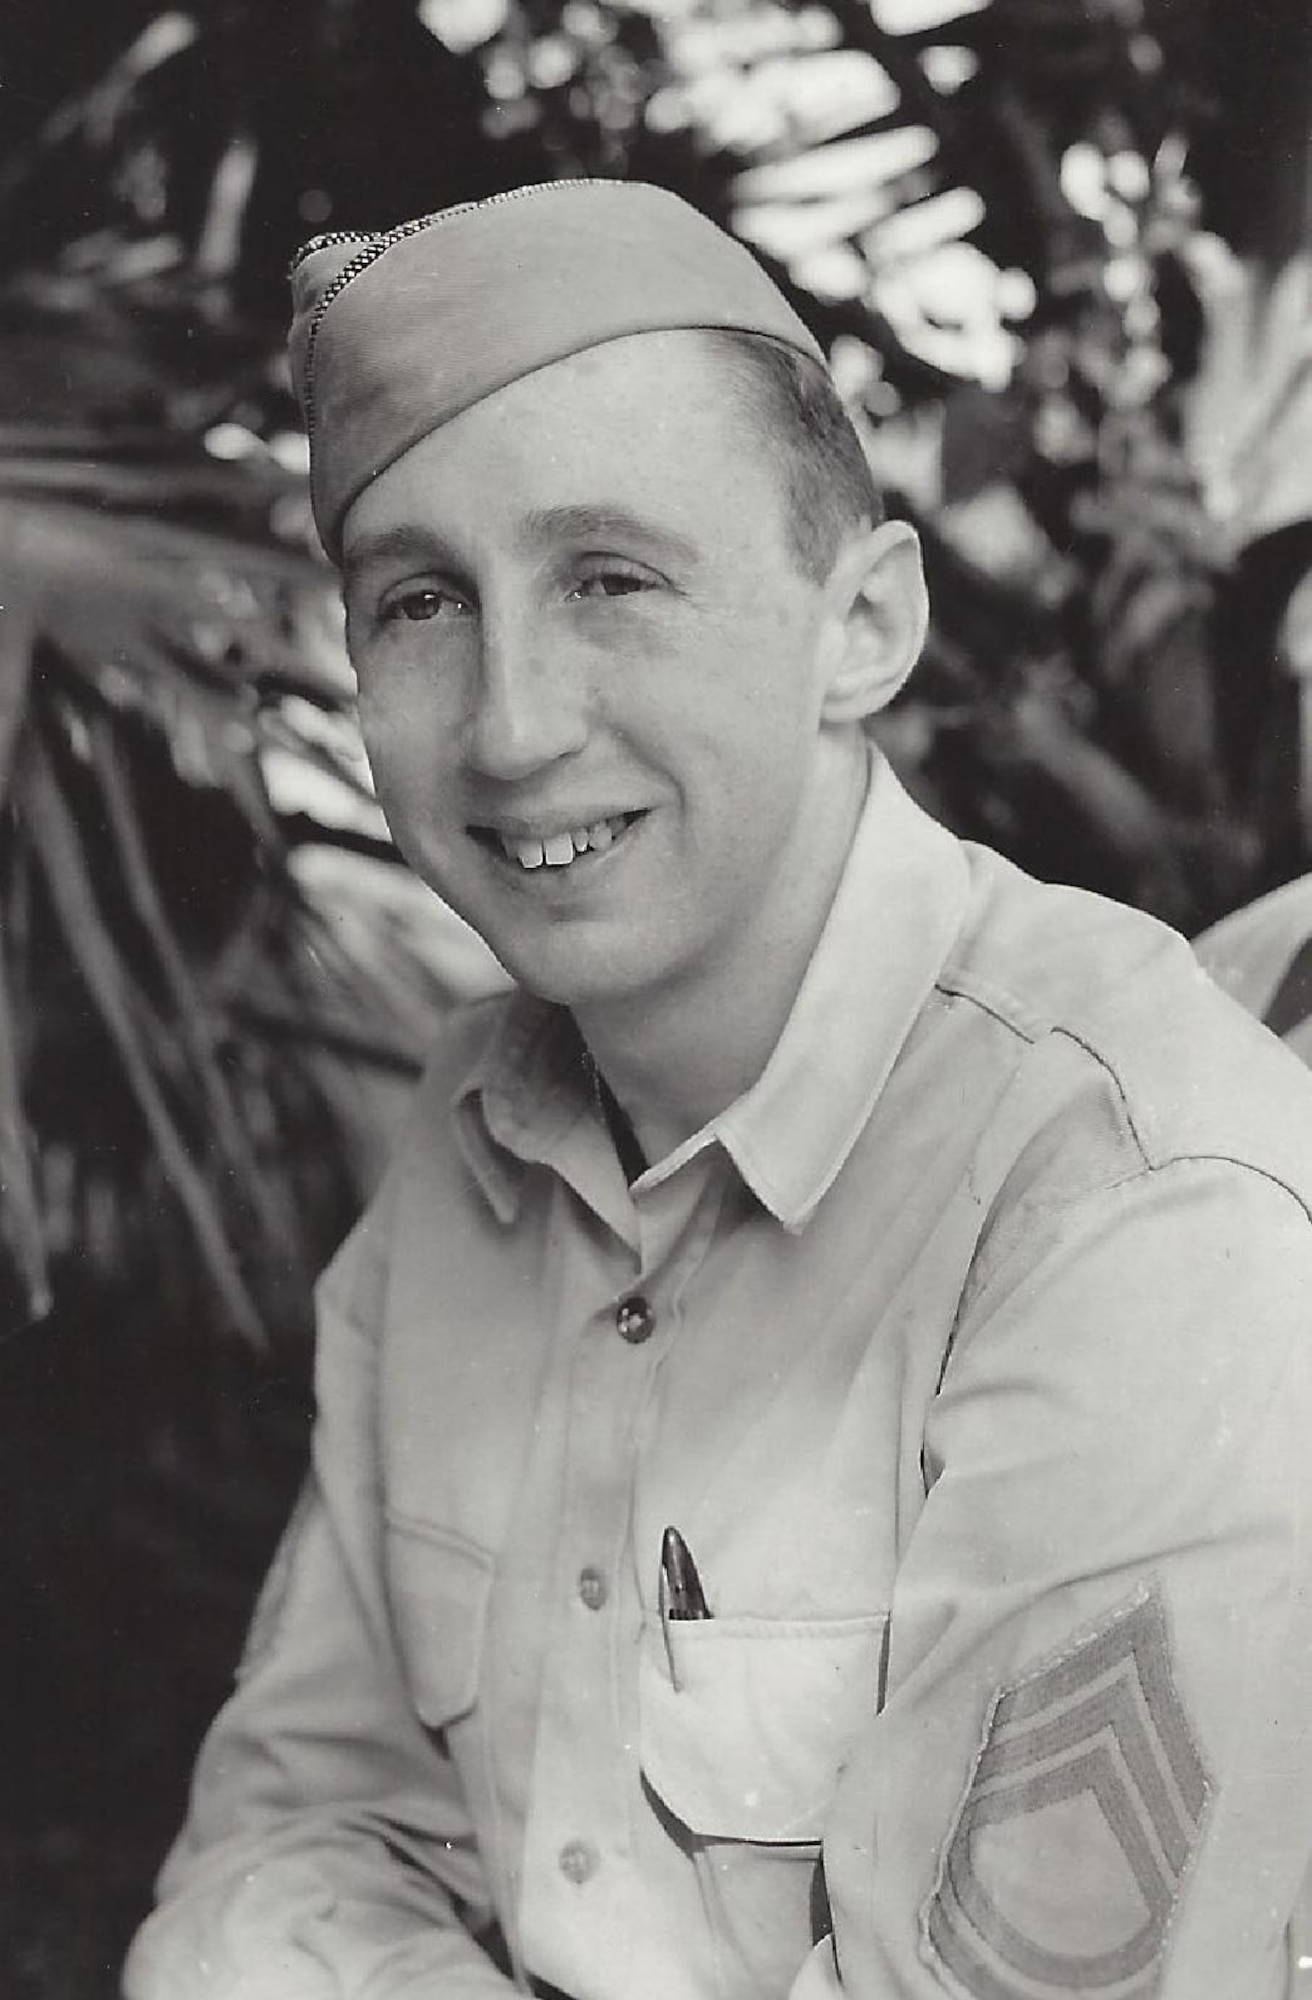 Technical Sergeant (T/Sgt) Fred Parish, an original member of Oregon's 123d Observation Squadron, is pictured here shortly after the Oregon Maneuver.  The photo was taken in 1944 while he served overseas in India, assigned to the 8th Photographic Reconnaissance Group, 10th Air Force, which operated in India and Burma. (Photo provided by T/Sgt Fred Parish)